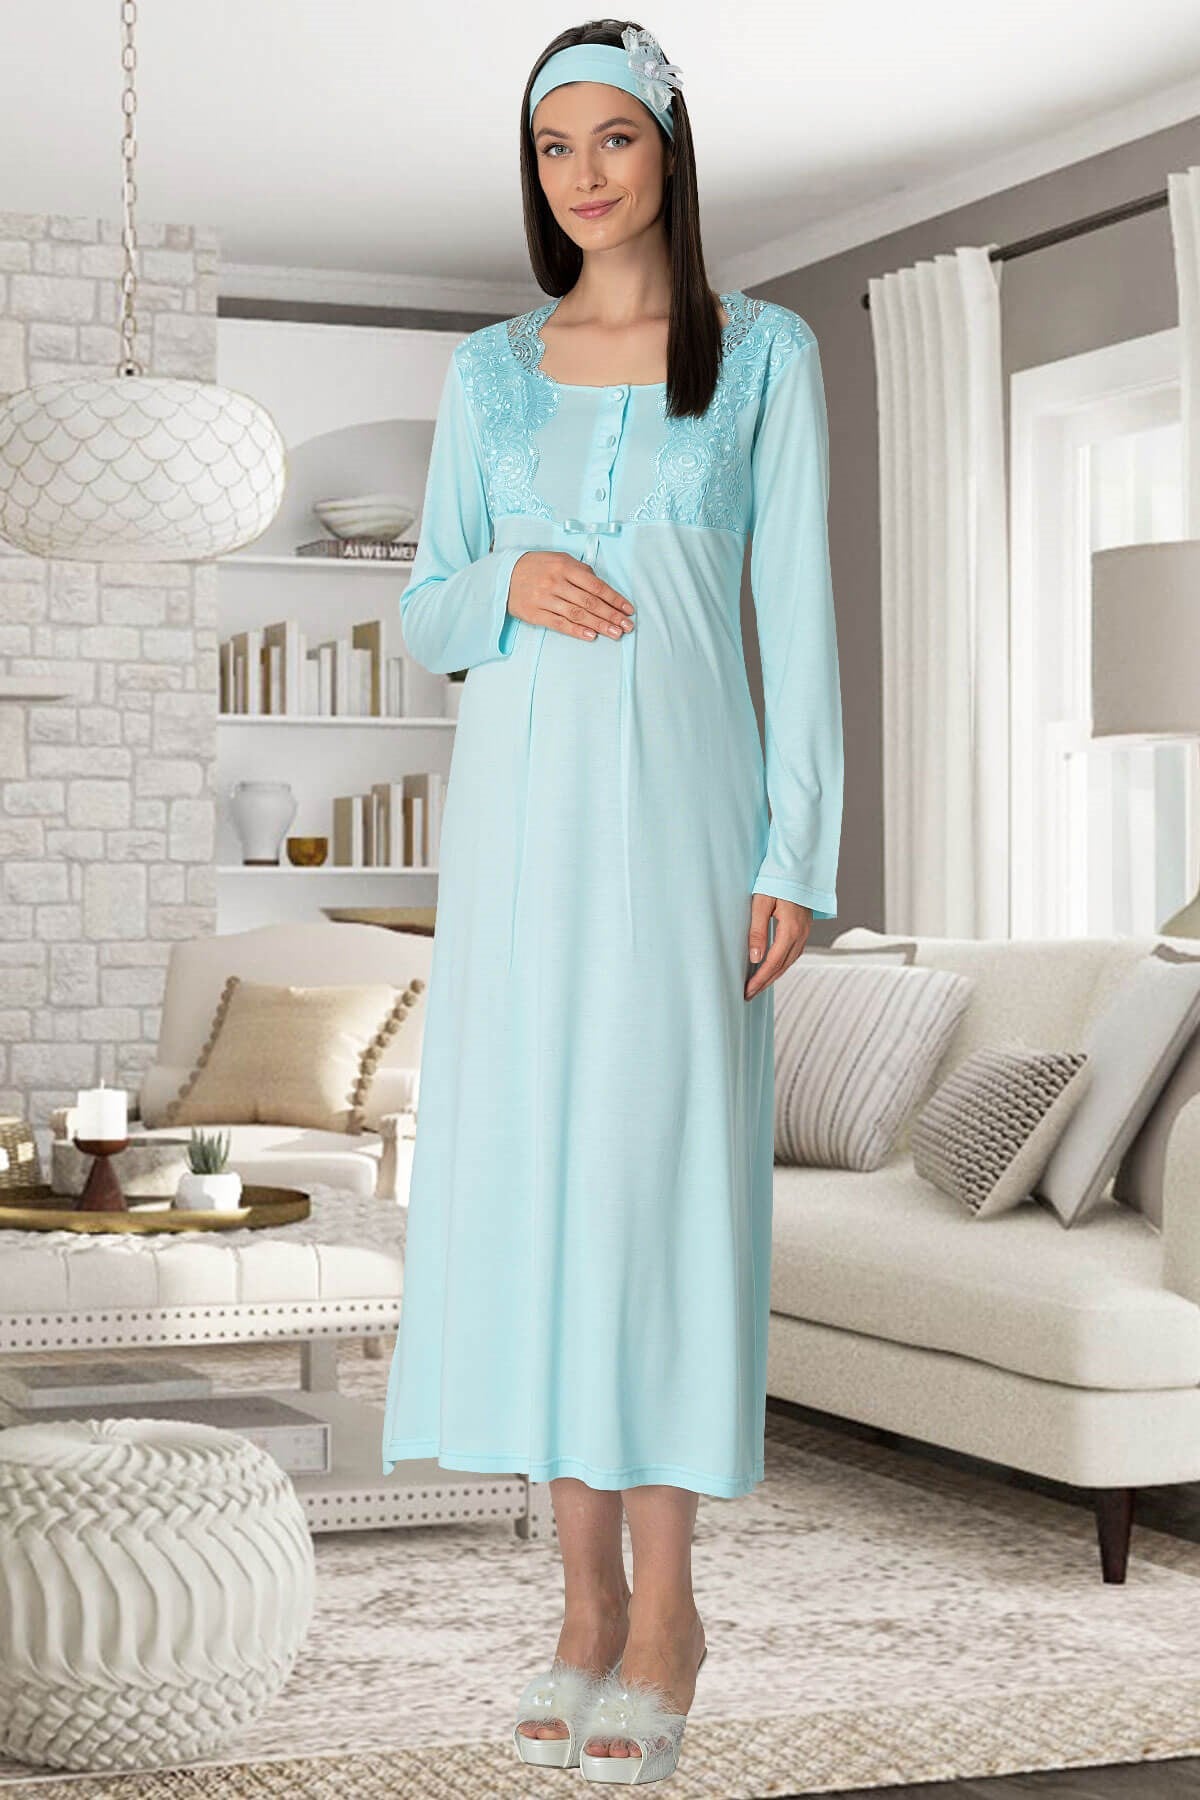 Shopymommy 5354 Lace Collar Maternity & Nursing Nightgown With Robe Turquoise